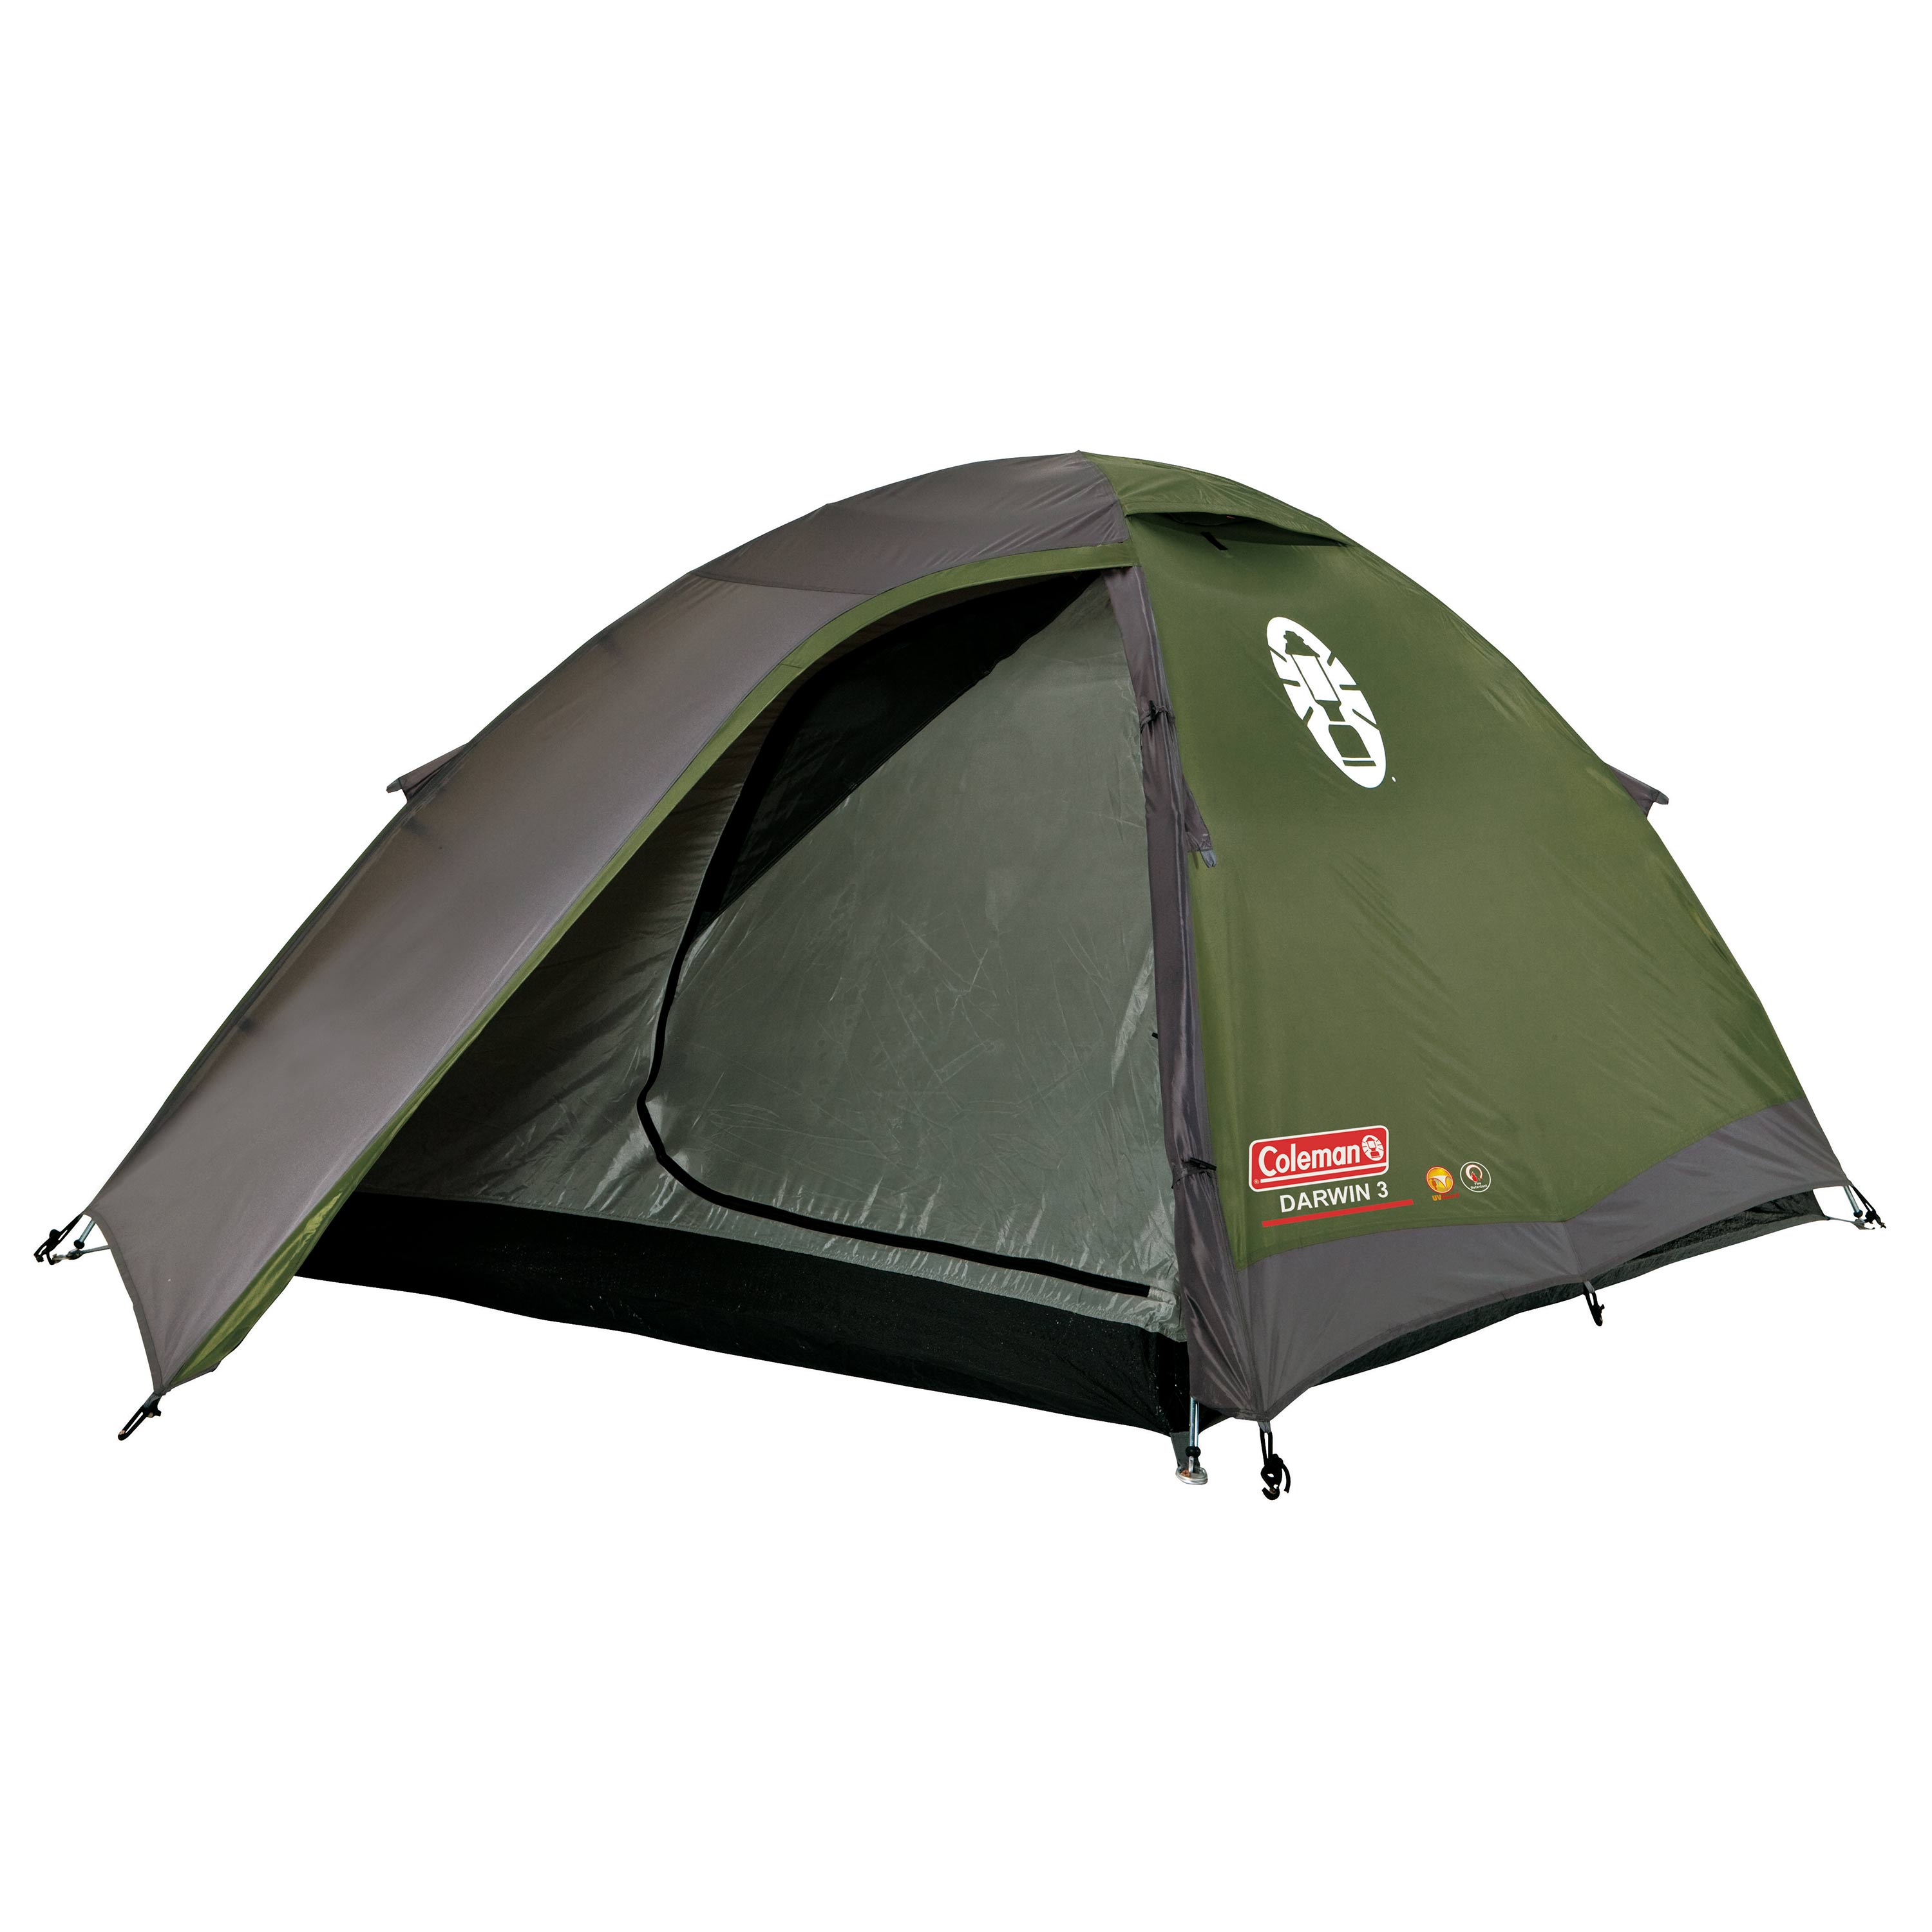 Purchase the Coleman Tent Darwin green by ASMC